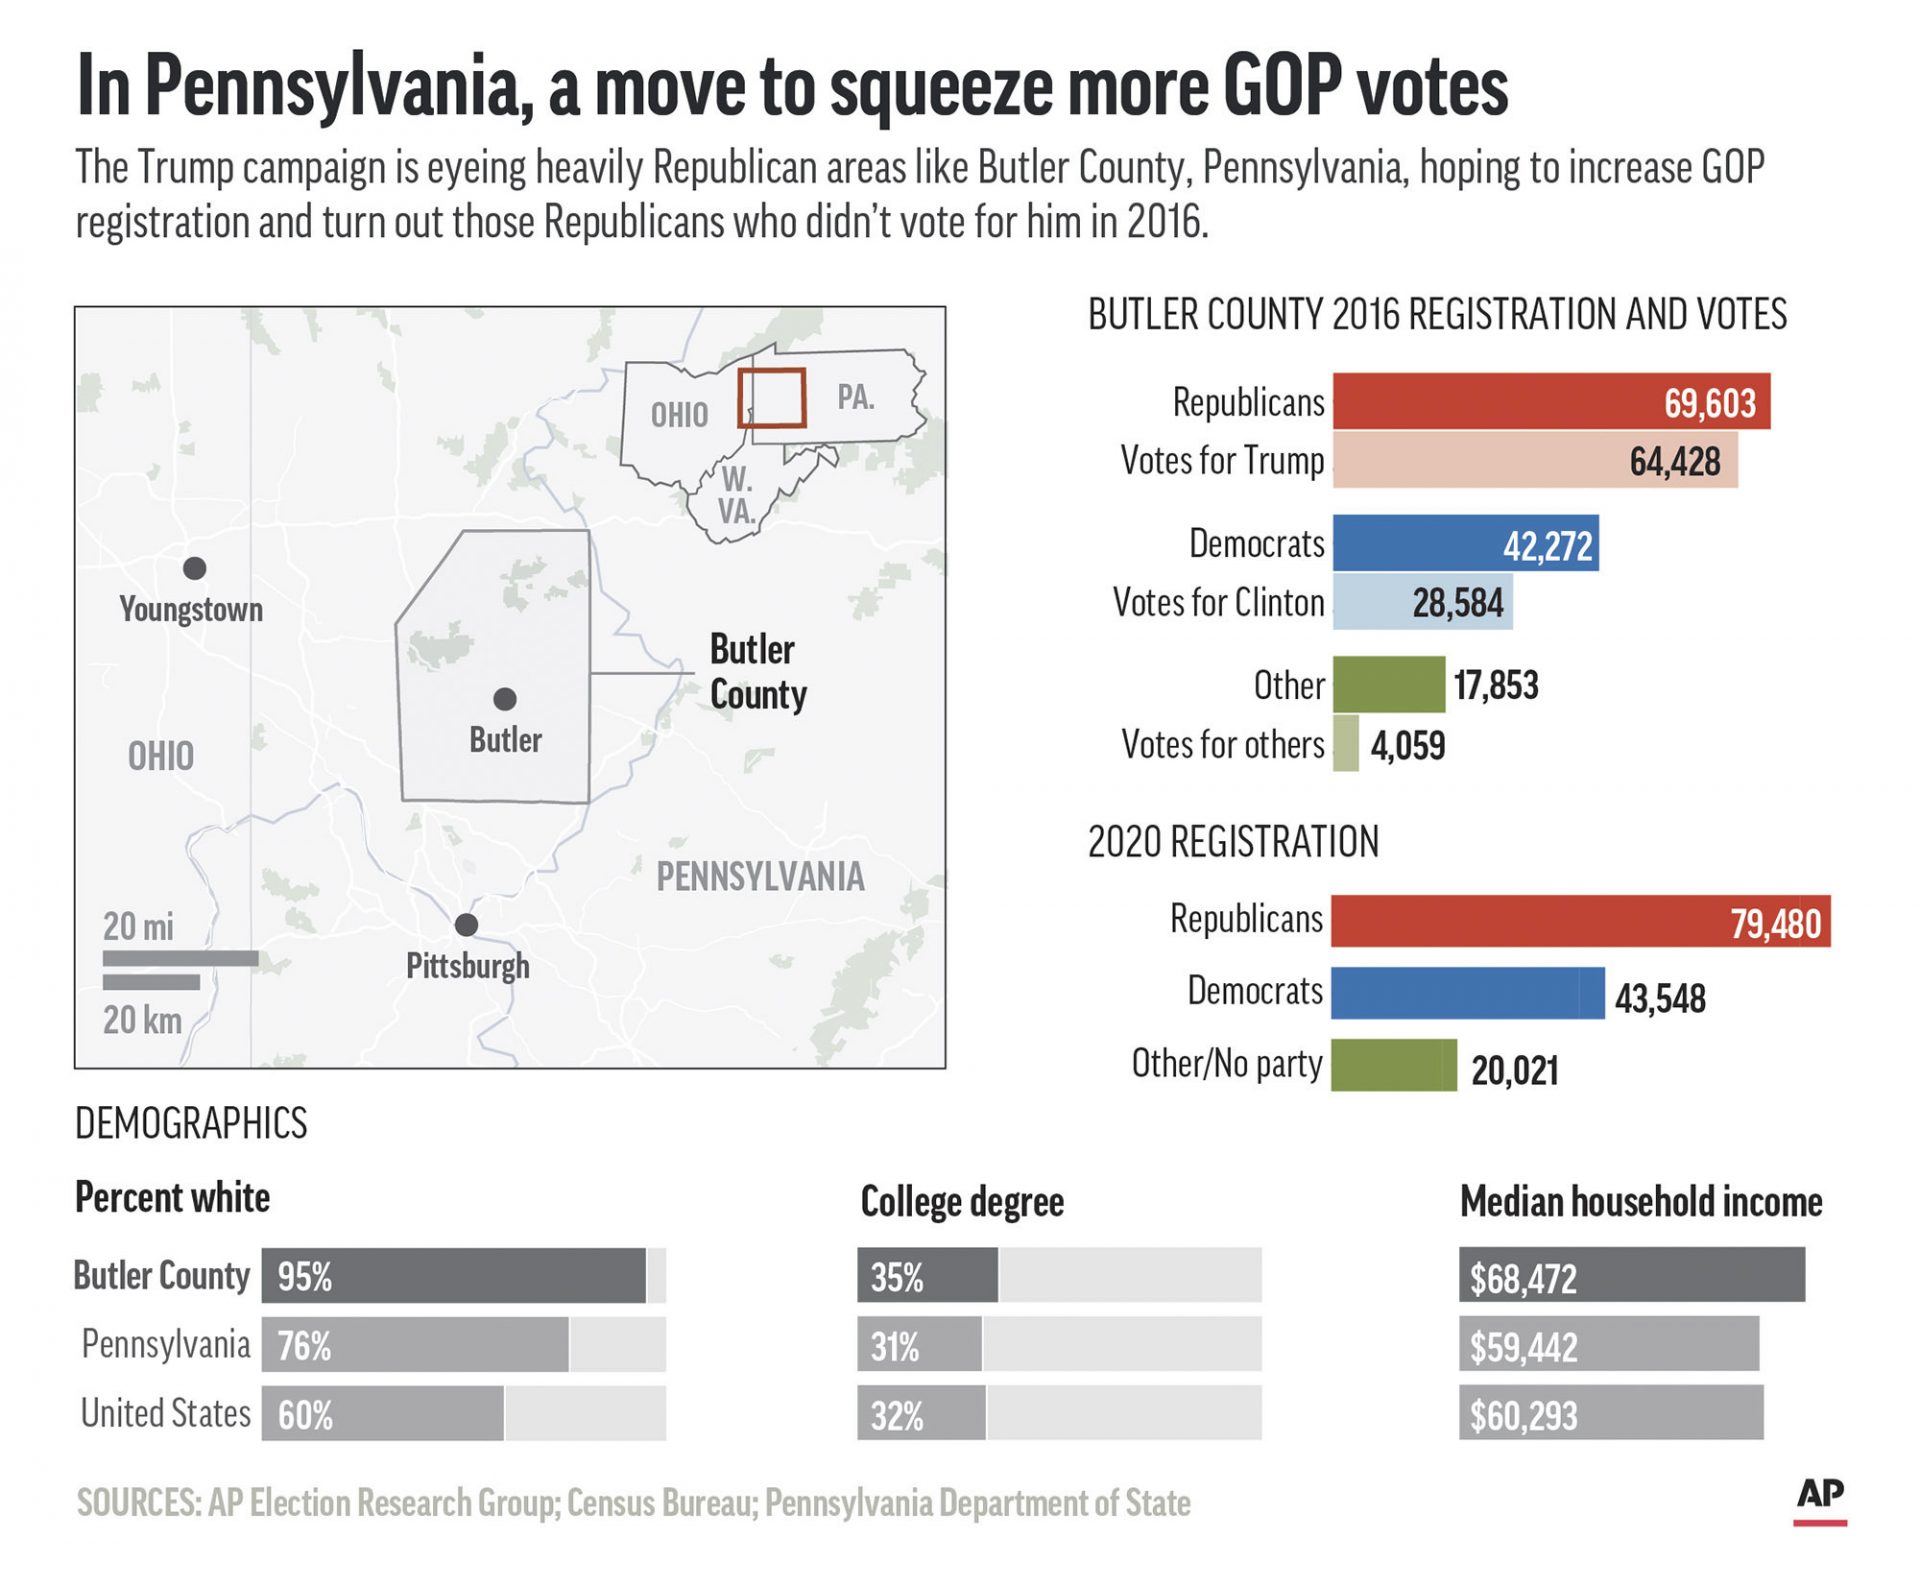 Graphic shows demographic and voter data for Butler County, Pennsylvania.